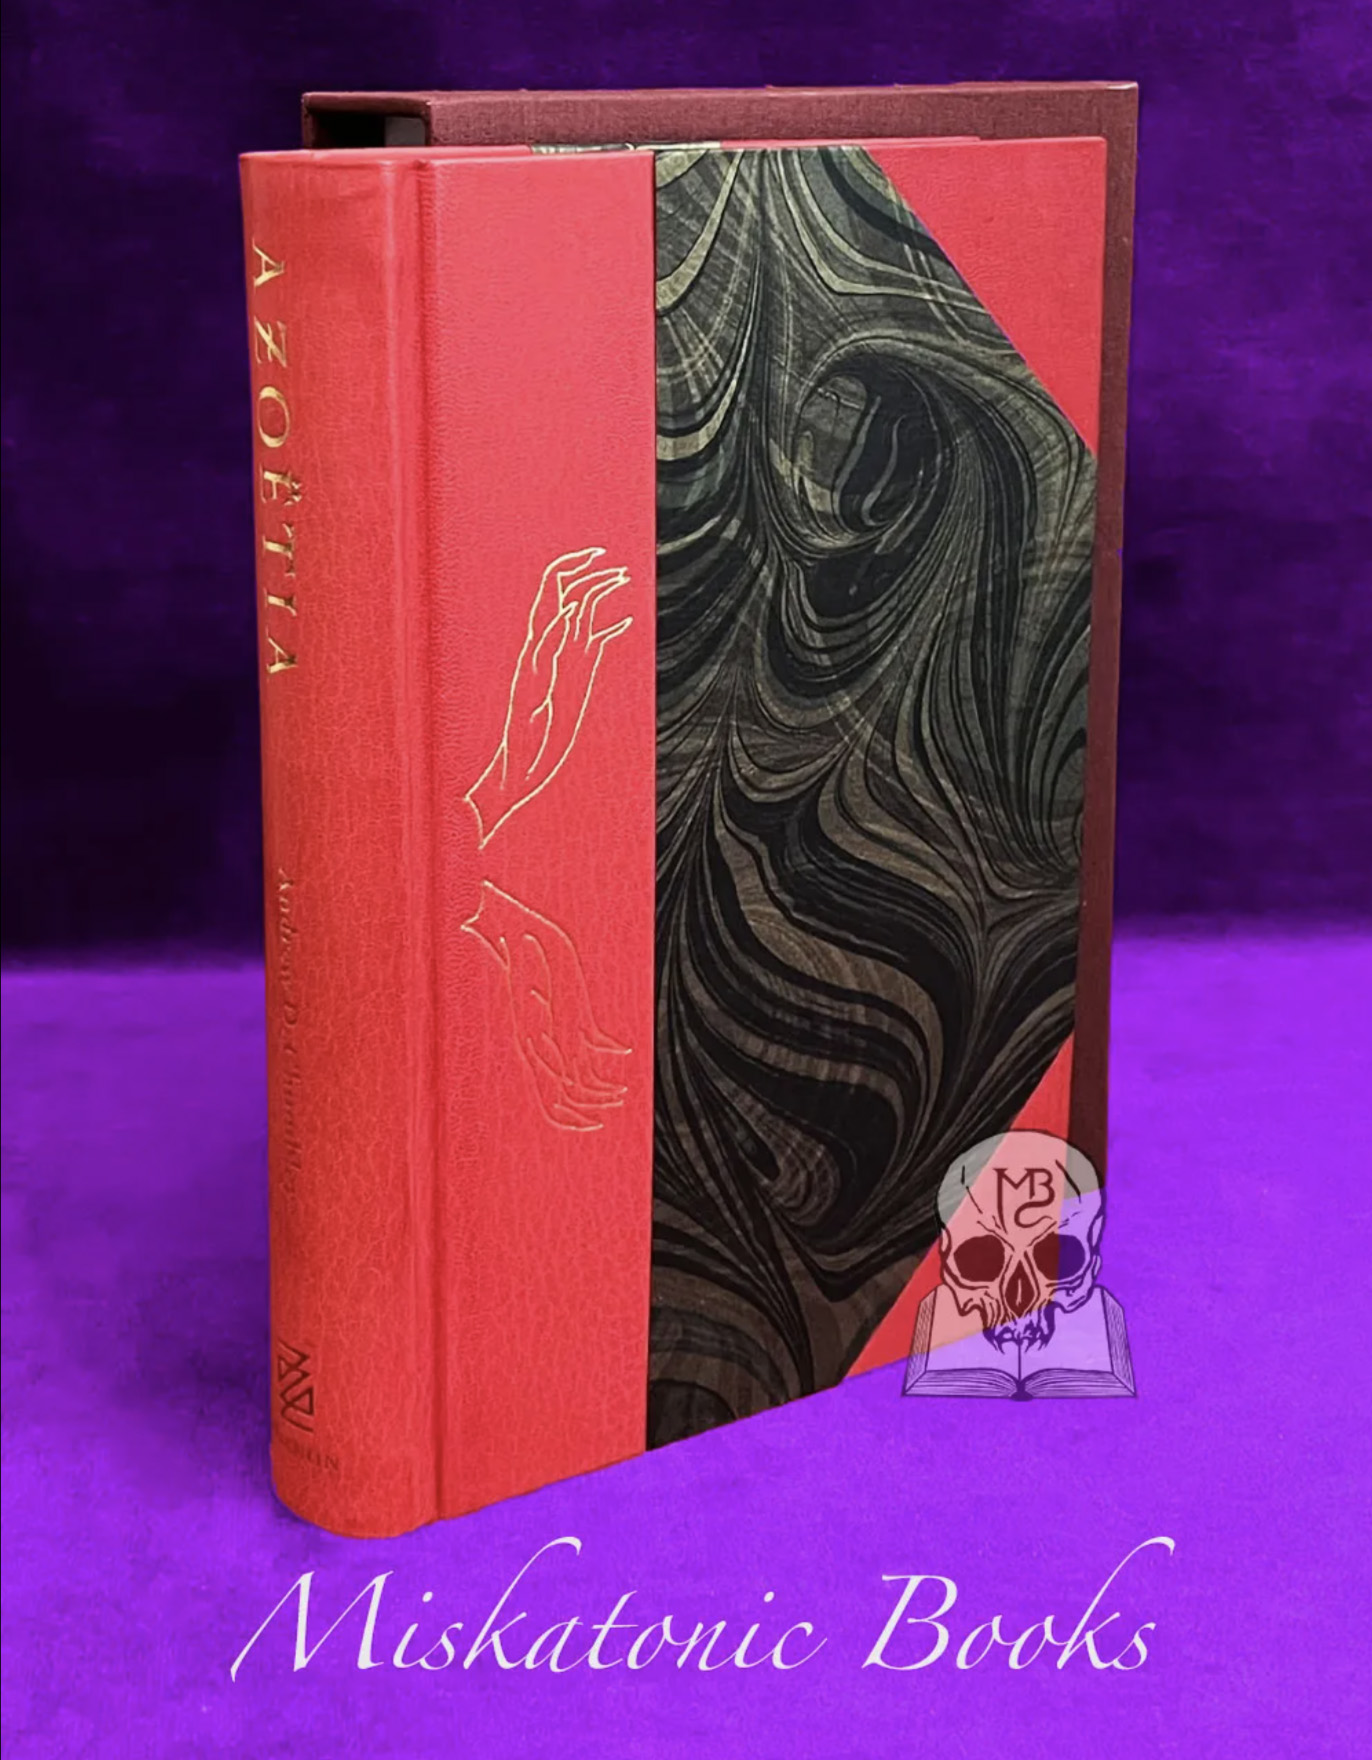 AZOETIA: A Grimoire of the Sabbatic Craft by Andrew D. Chumbley 3rd edition (Deluxe Limited Edition, Half Bound in Crimson Goat in Custom Slipcase)